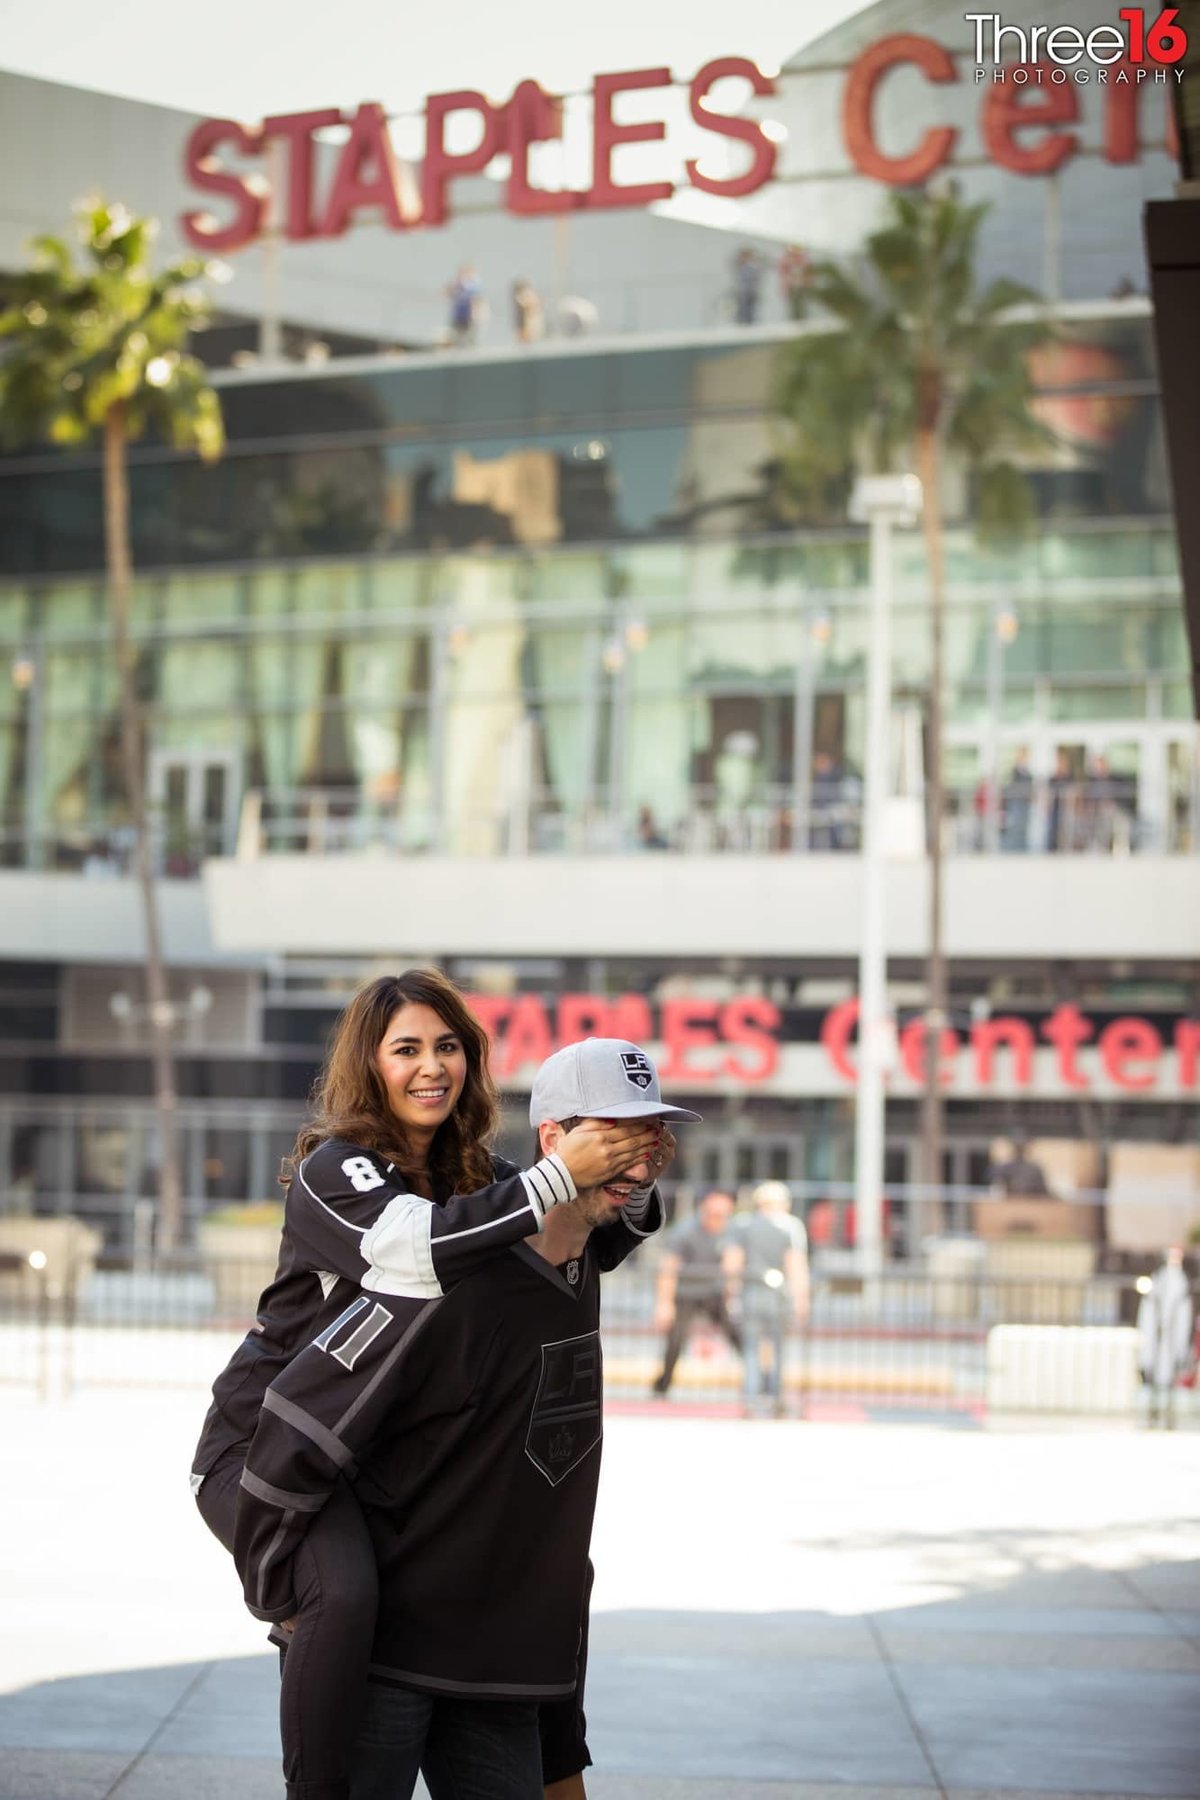 Staples Center Engagement Photos Los Angeles County Weddings Professional Urban